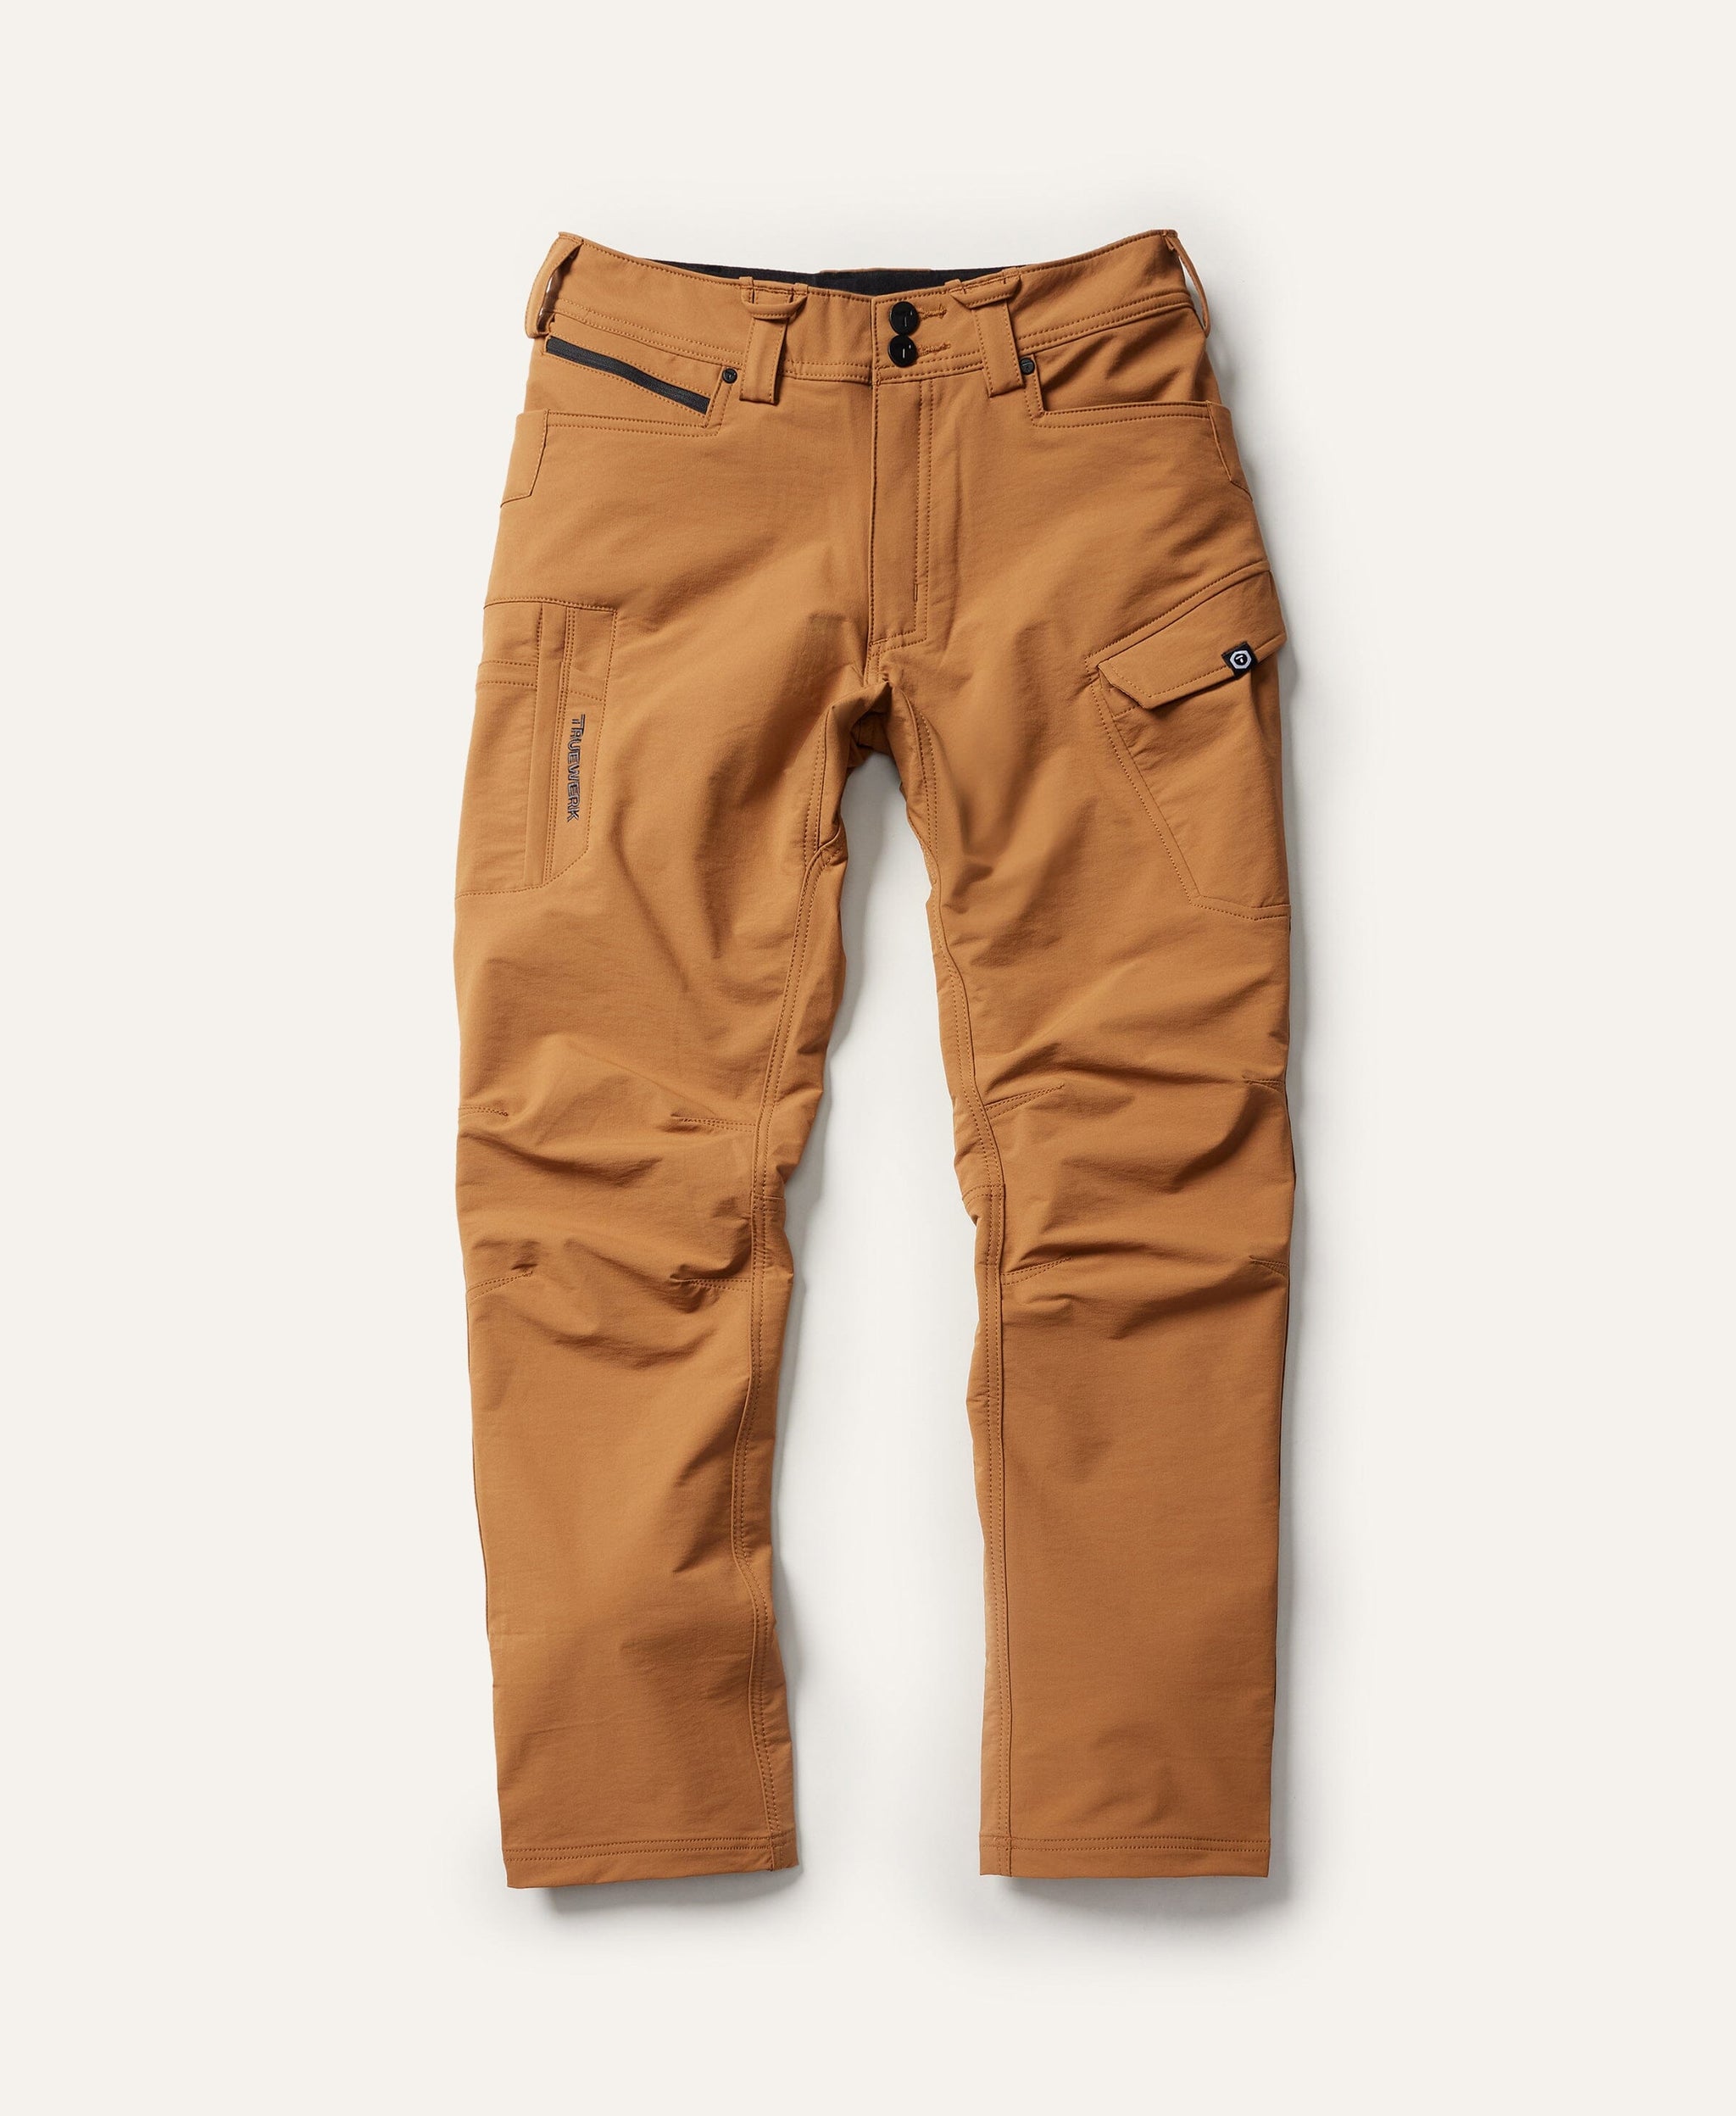 The most comfortable pants in the world — Cinder Block